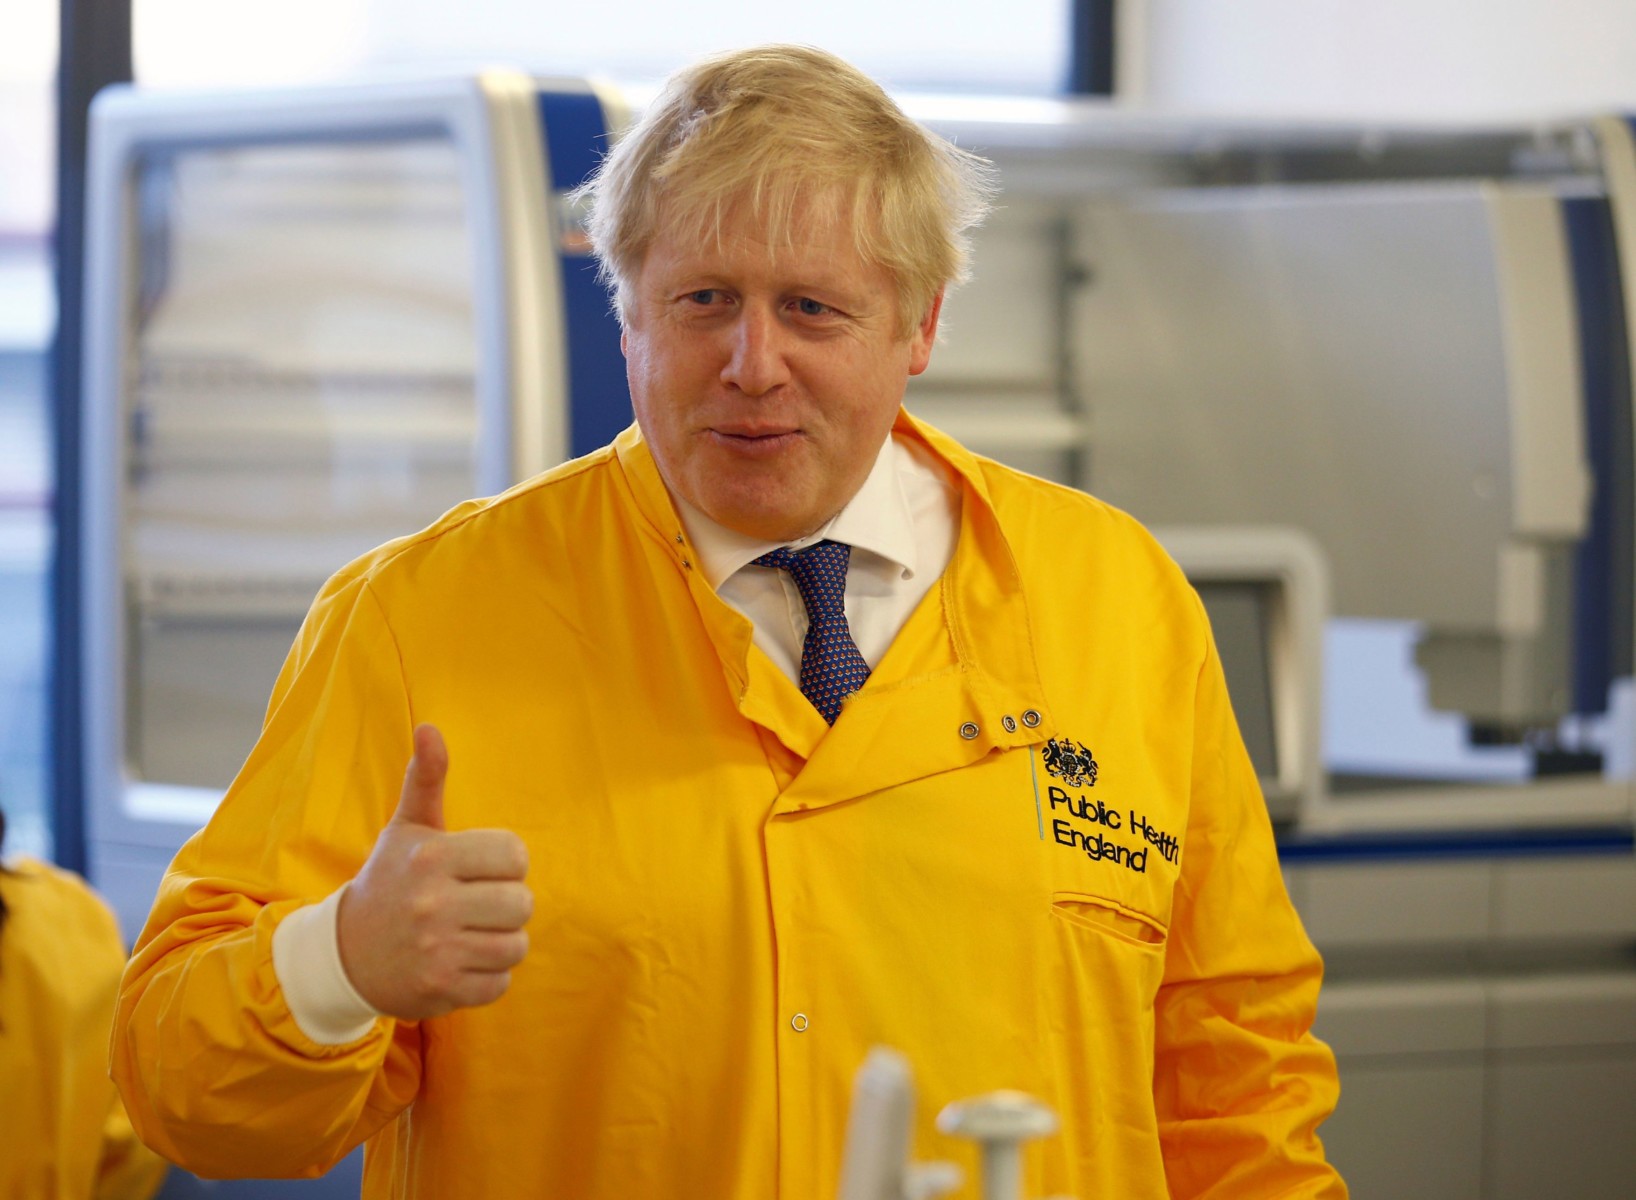 PM Boris Johnson said with a free trade deal shoppers will pay ultra-low prices on US goods whilst still protecting the NHS and maintaining high food standards